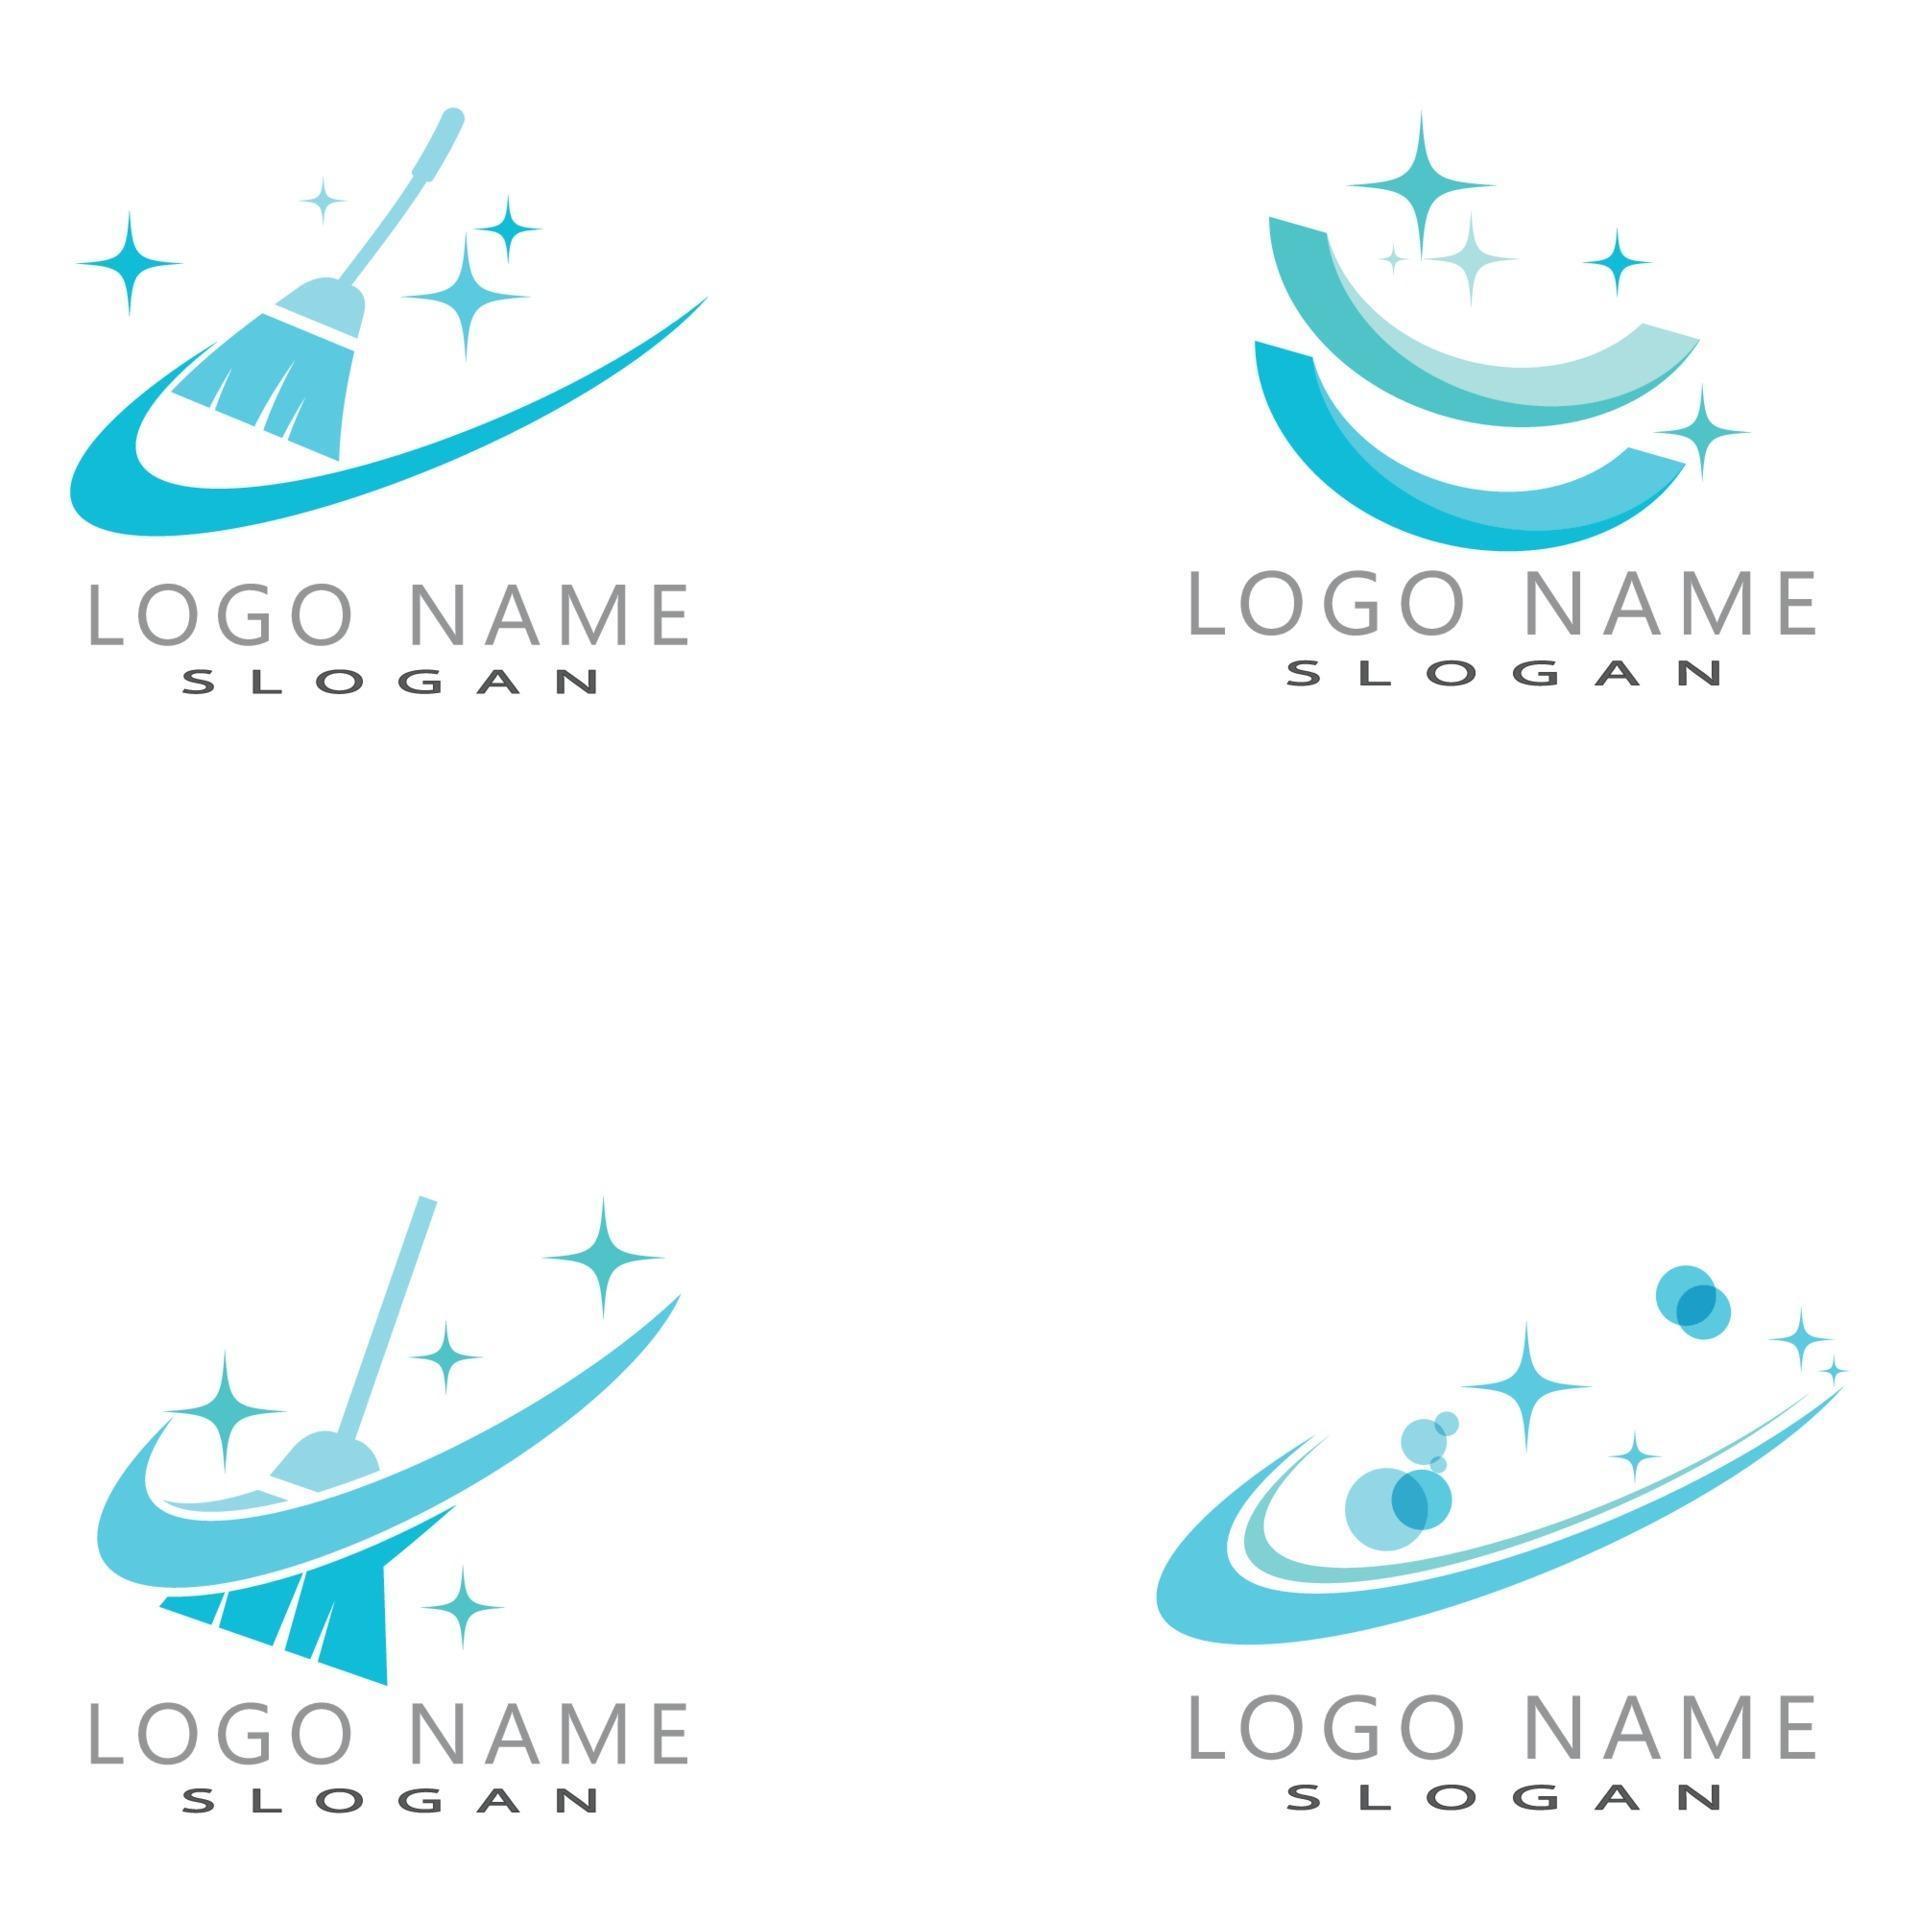 cleaning-clean-service-logo-icon-vector-template-set-2255942-vector-art-at-vecteezy